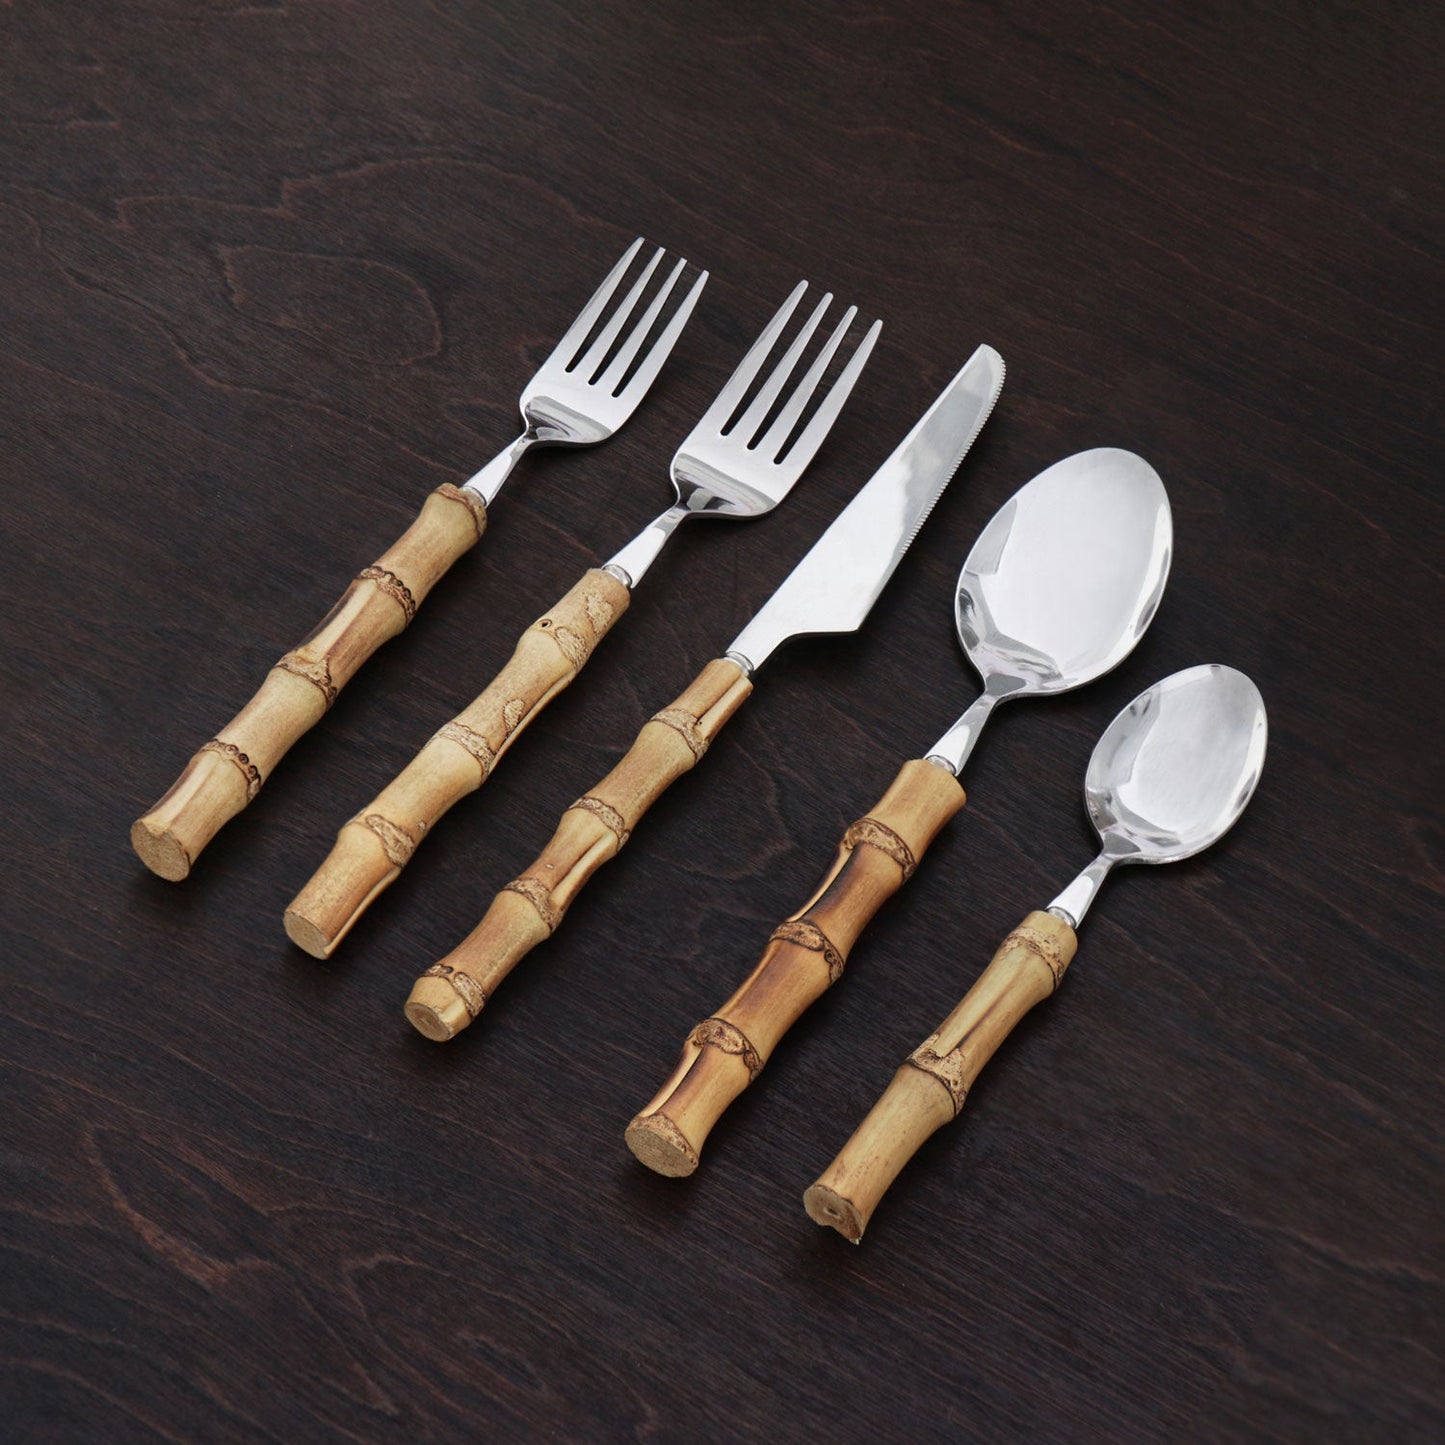 VIDA Bamboo Flatware Set of 5 (Silver and Natural) - Gaines Jewelers